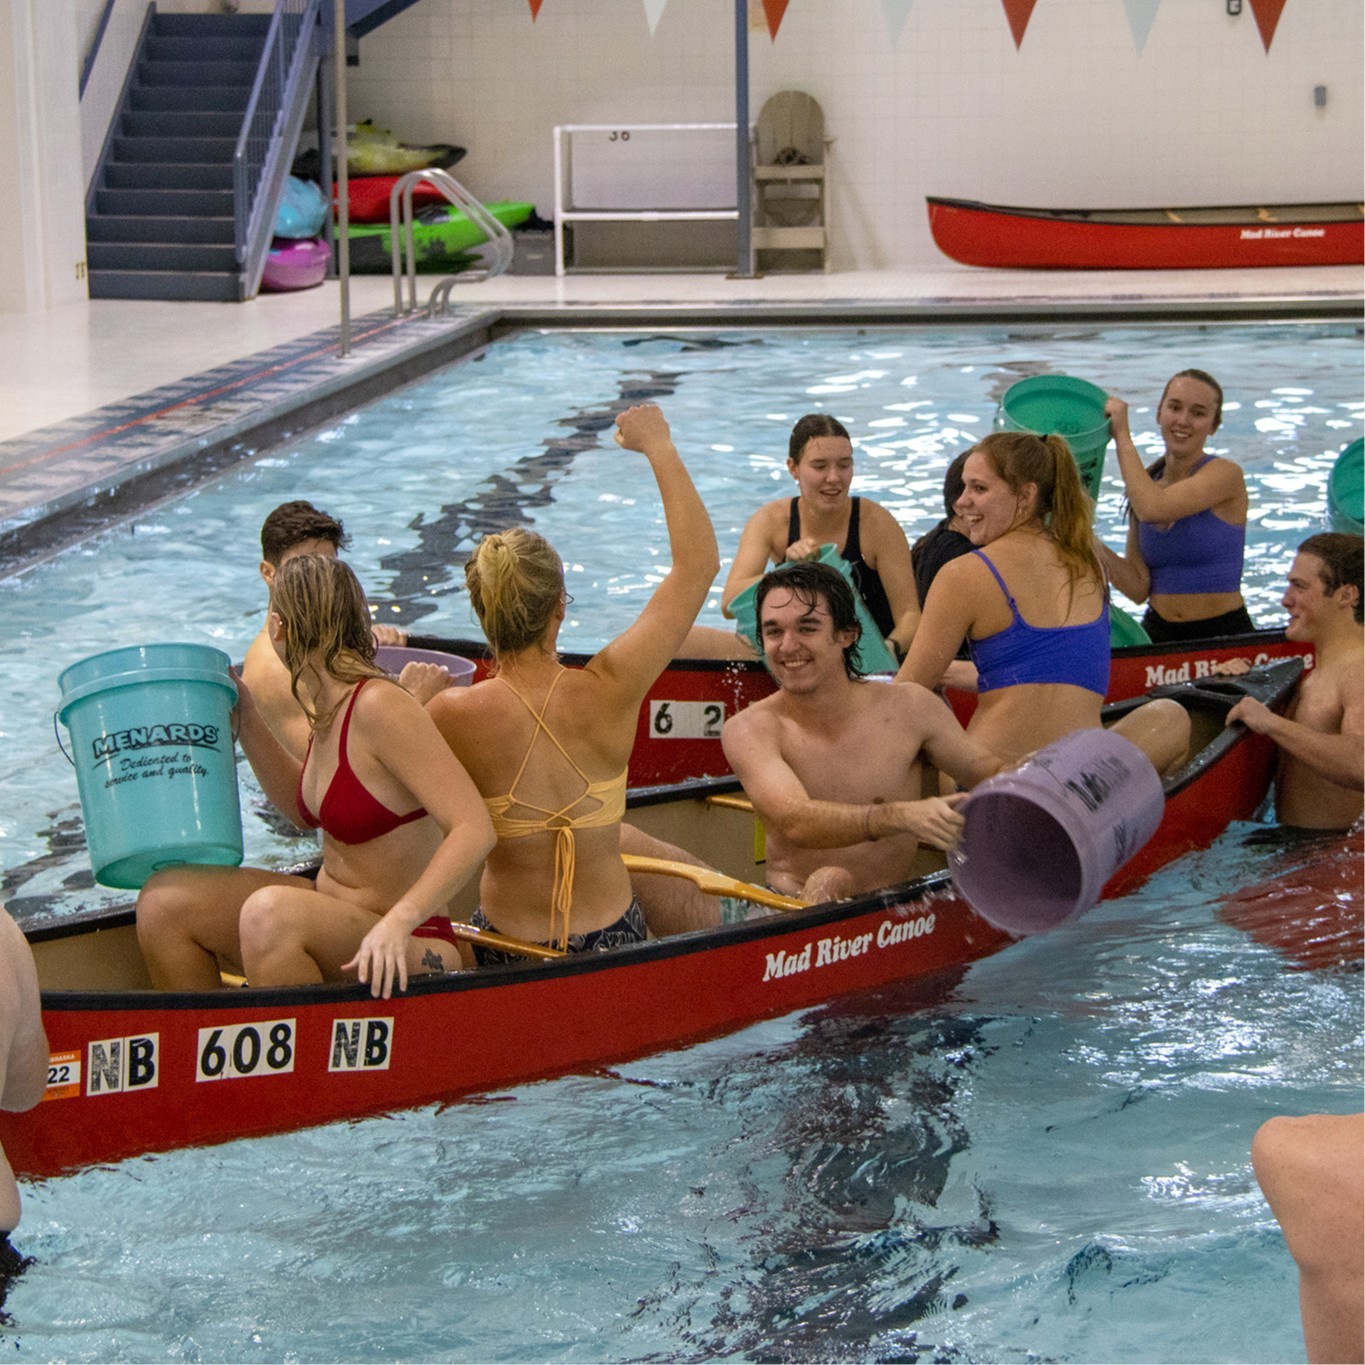 Battleship is played in canoes at the pool in the Campus Rec Center.